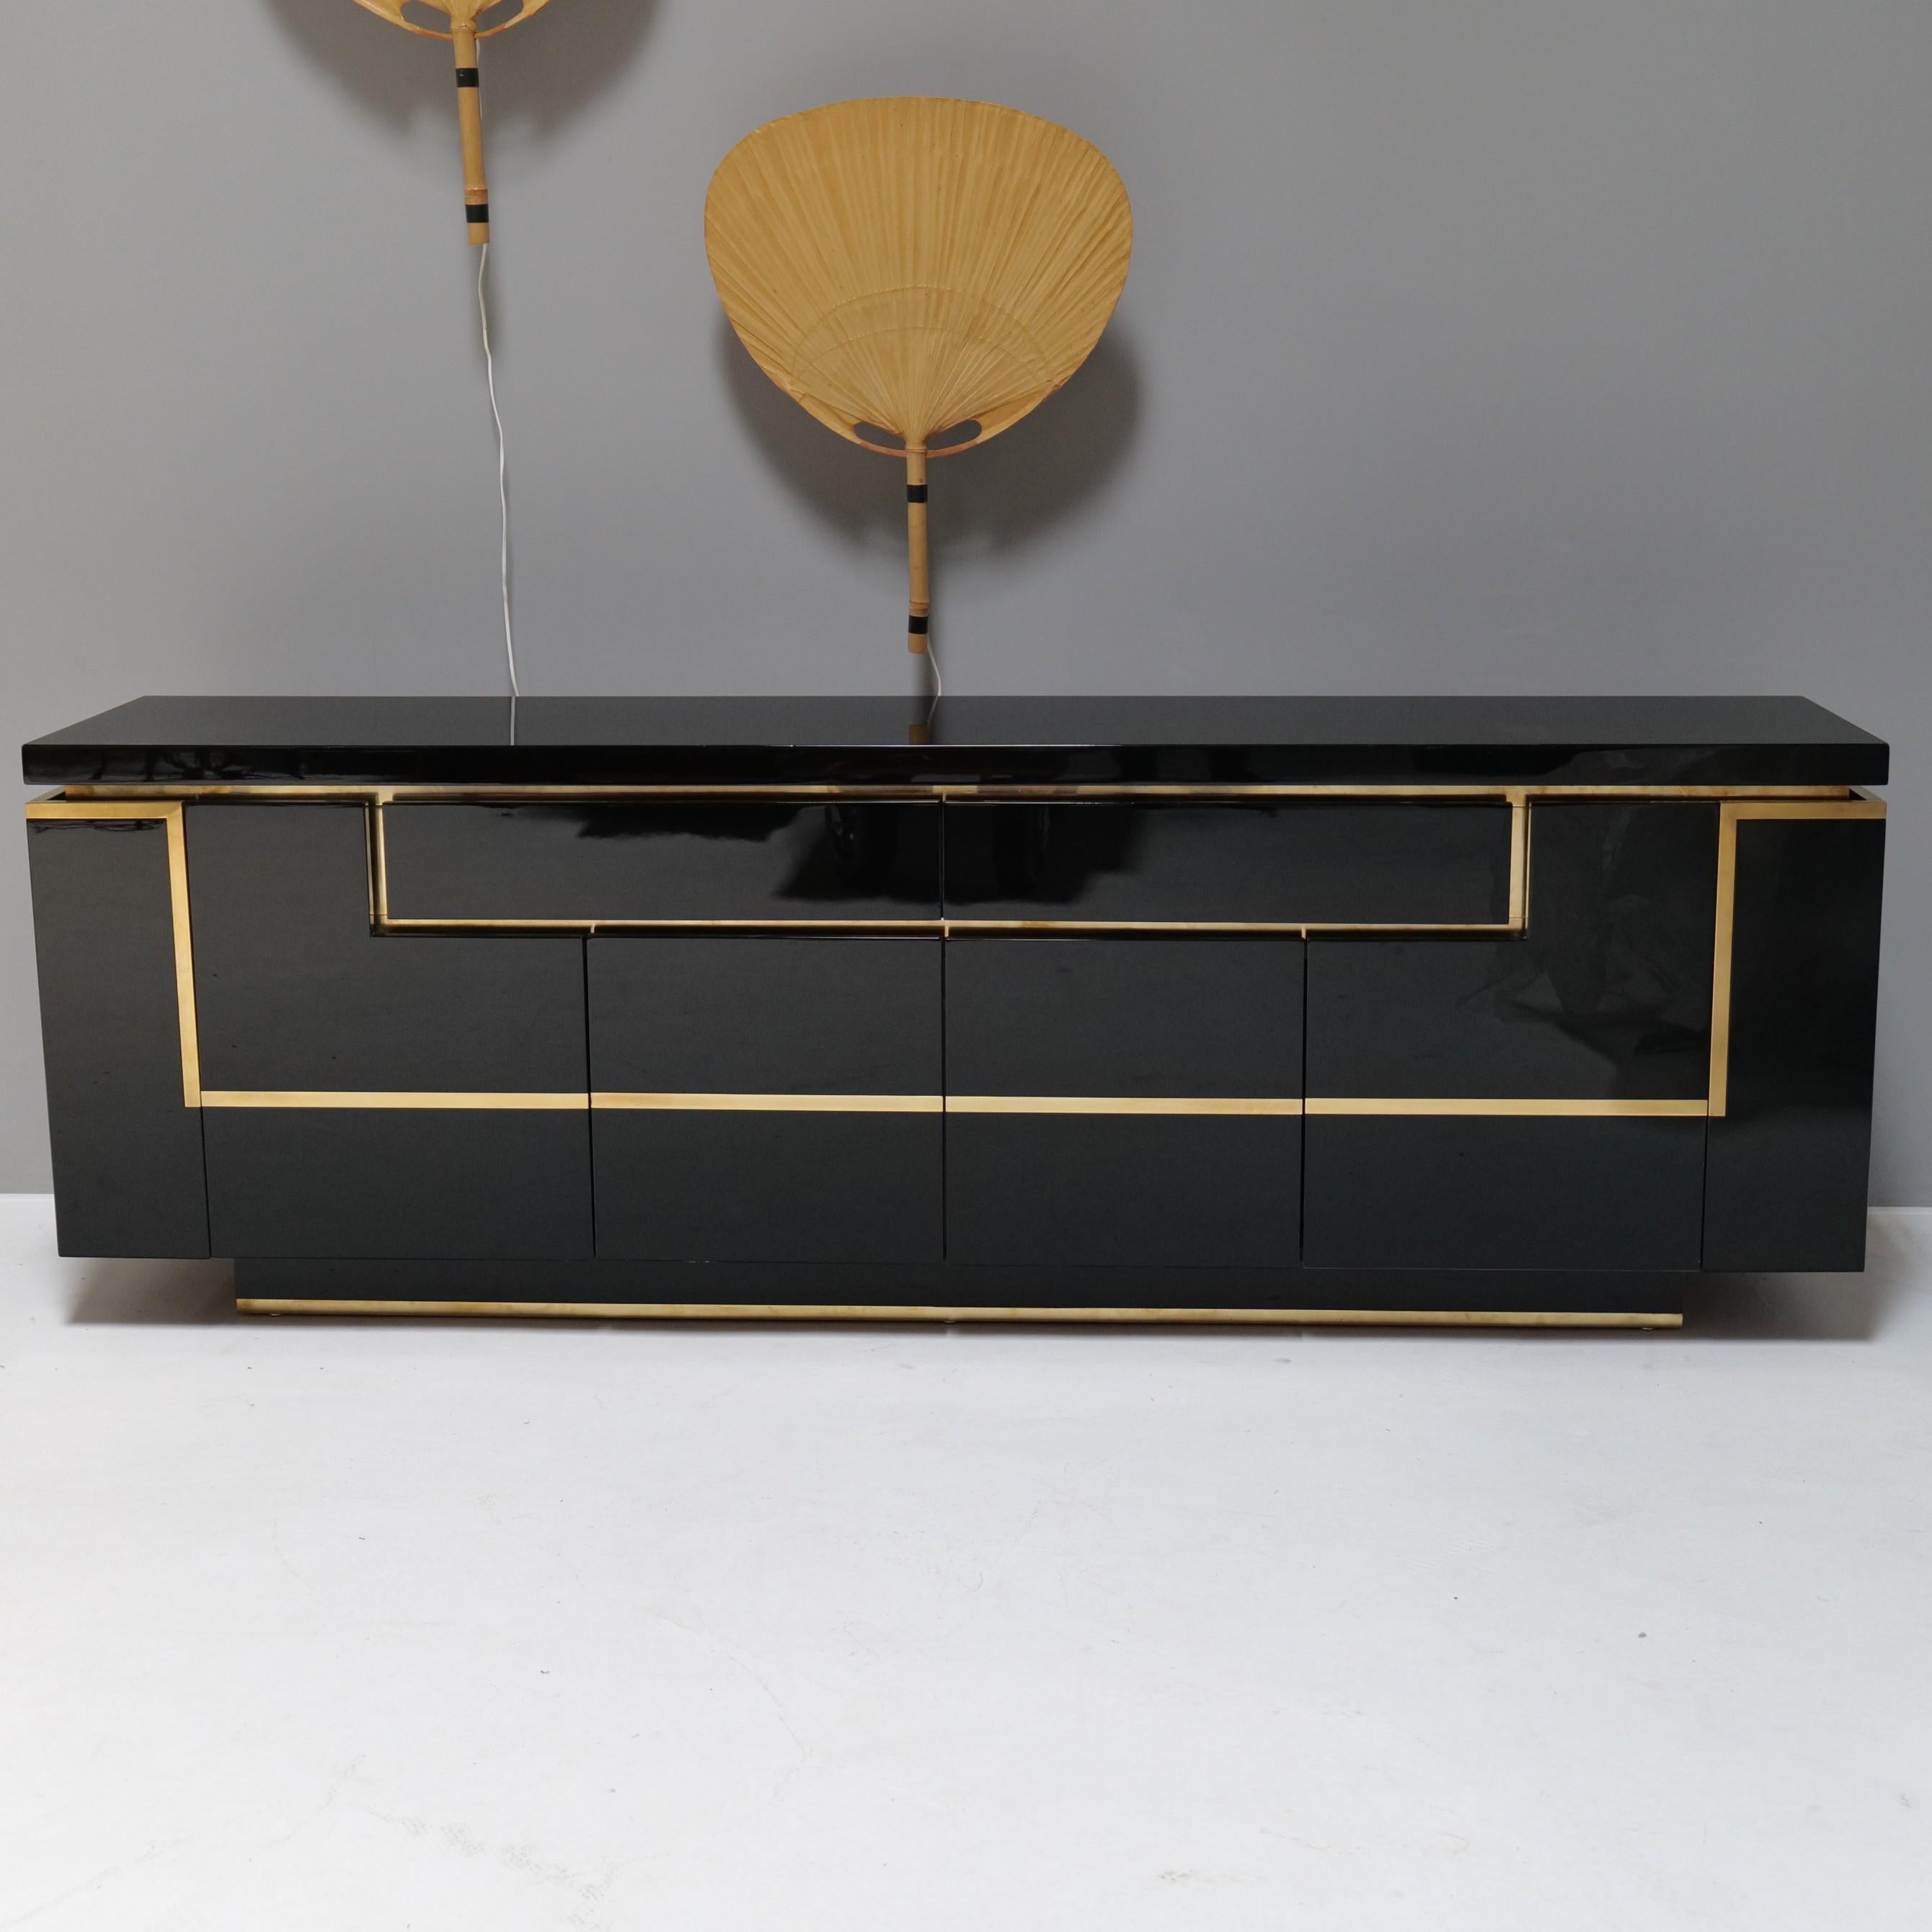 Large sideboard made of brass and black high-gloss piano lacquer.
Behind the two outer hinged doors is the elegantly integrated bar.
The beautifully crafted interior compartments perfectly complement the brass elements and also provide plenty of